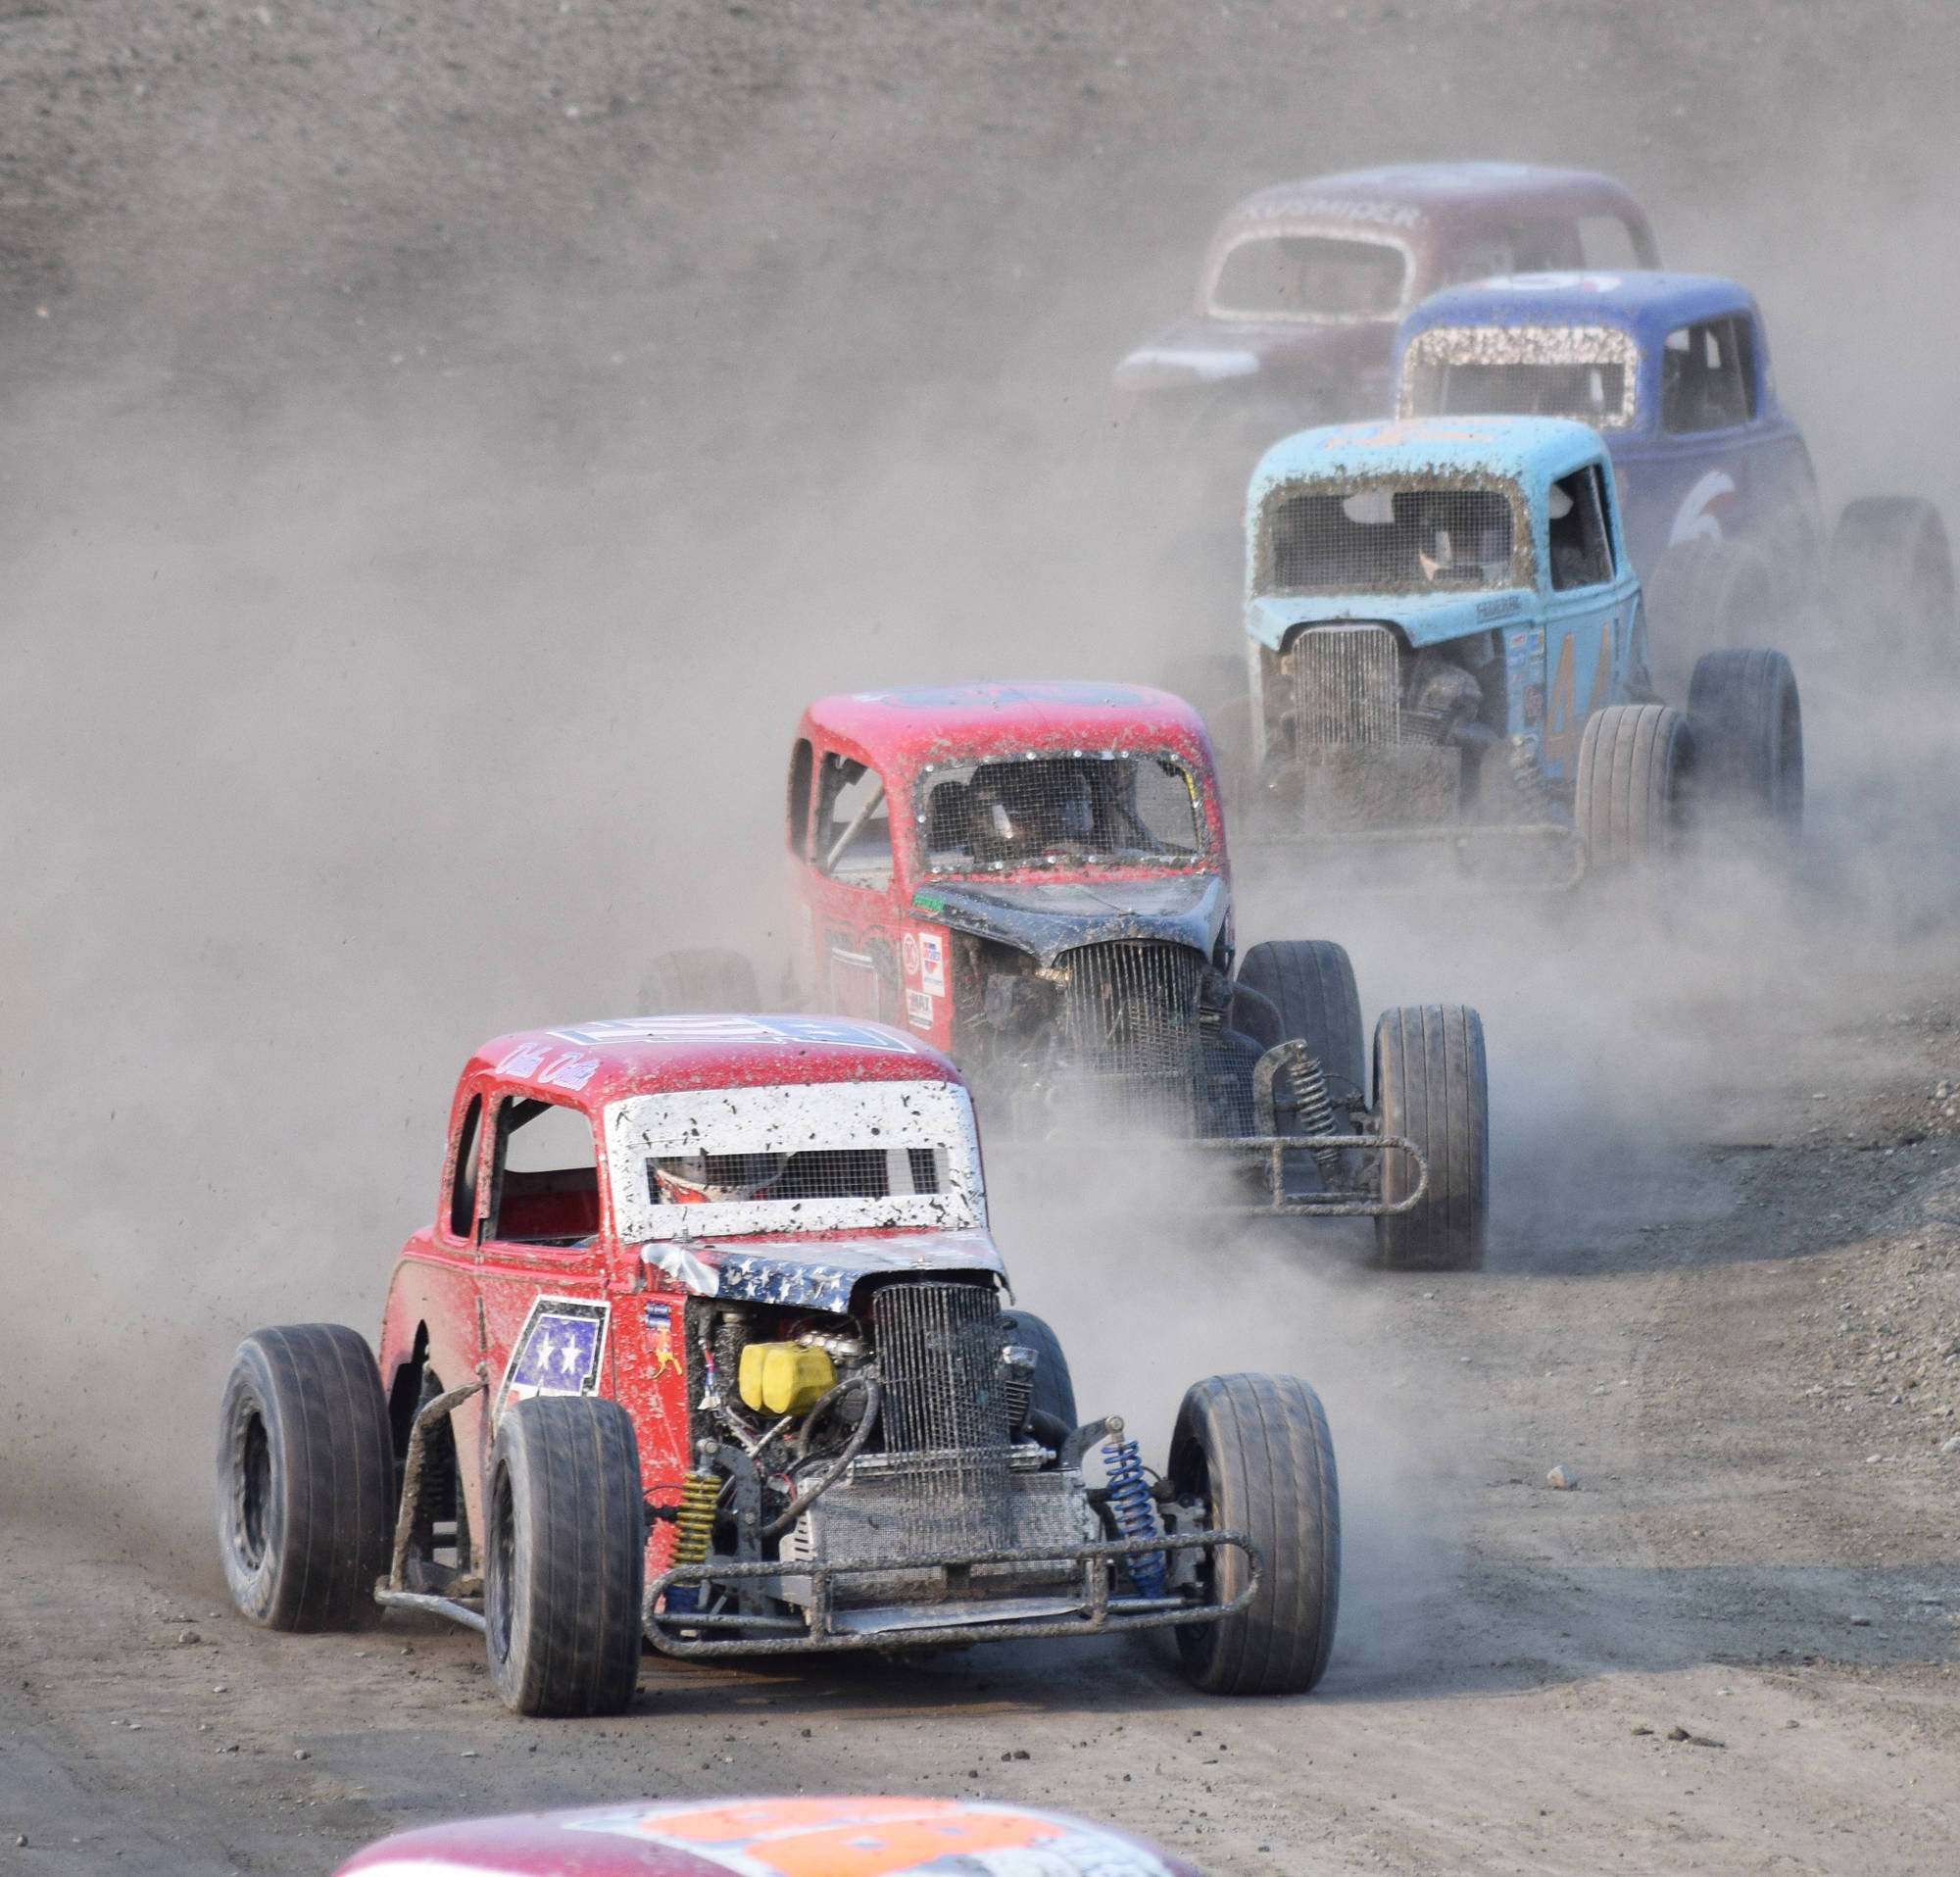 Dallas Dalton in the #4 Legends car leads a group of racers around a turn Saturday, June 29, 2019, at Twin Cities Raceway in Kenai, Alaska. (Photo by Joey Klecka/Peninsula Clarion)